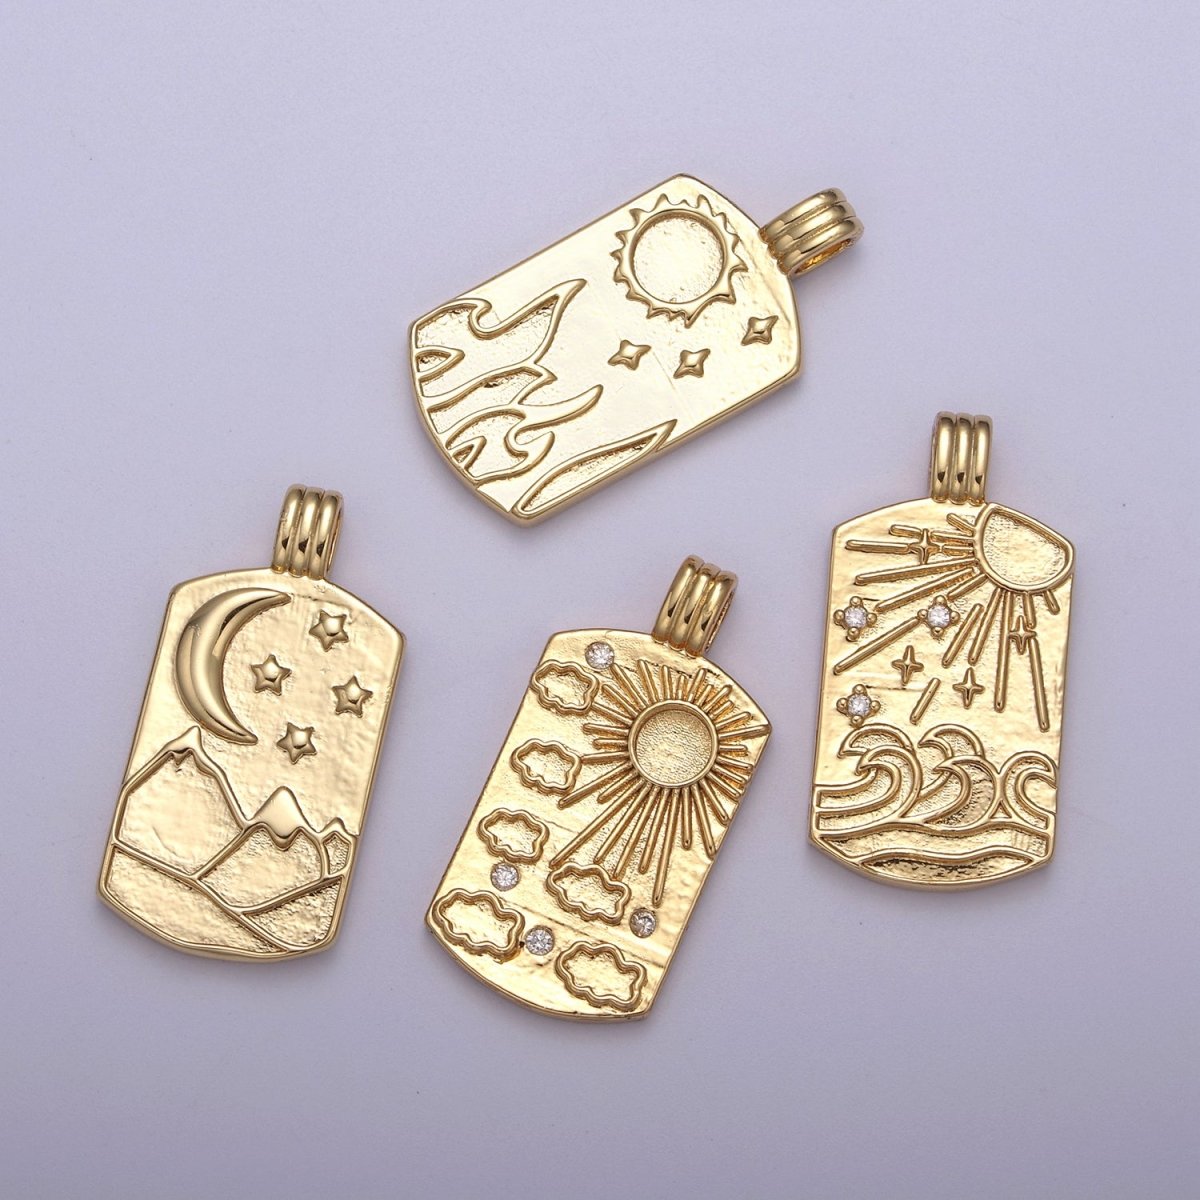 New Element Tag Collection Gold Element Charm Fire Wind Earth Ocean Wave Charm 14K Gold Filled Medallion for Necklace Supply H-519 H-521 H-522 H-524 - DLUXCA